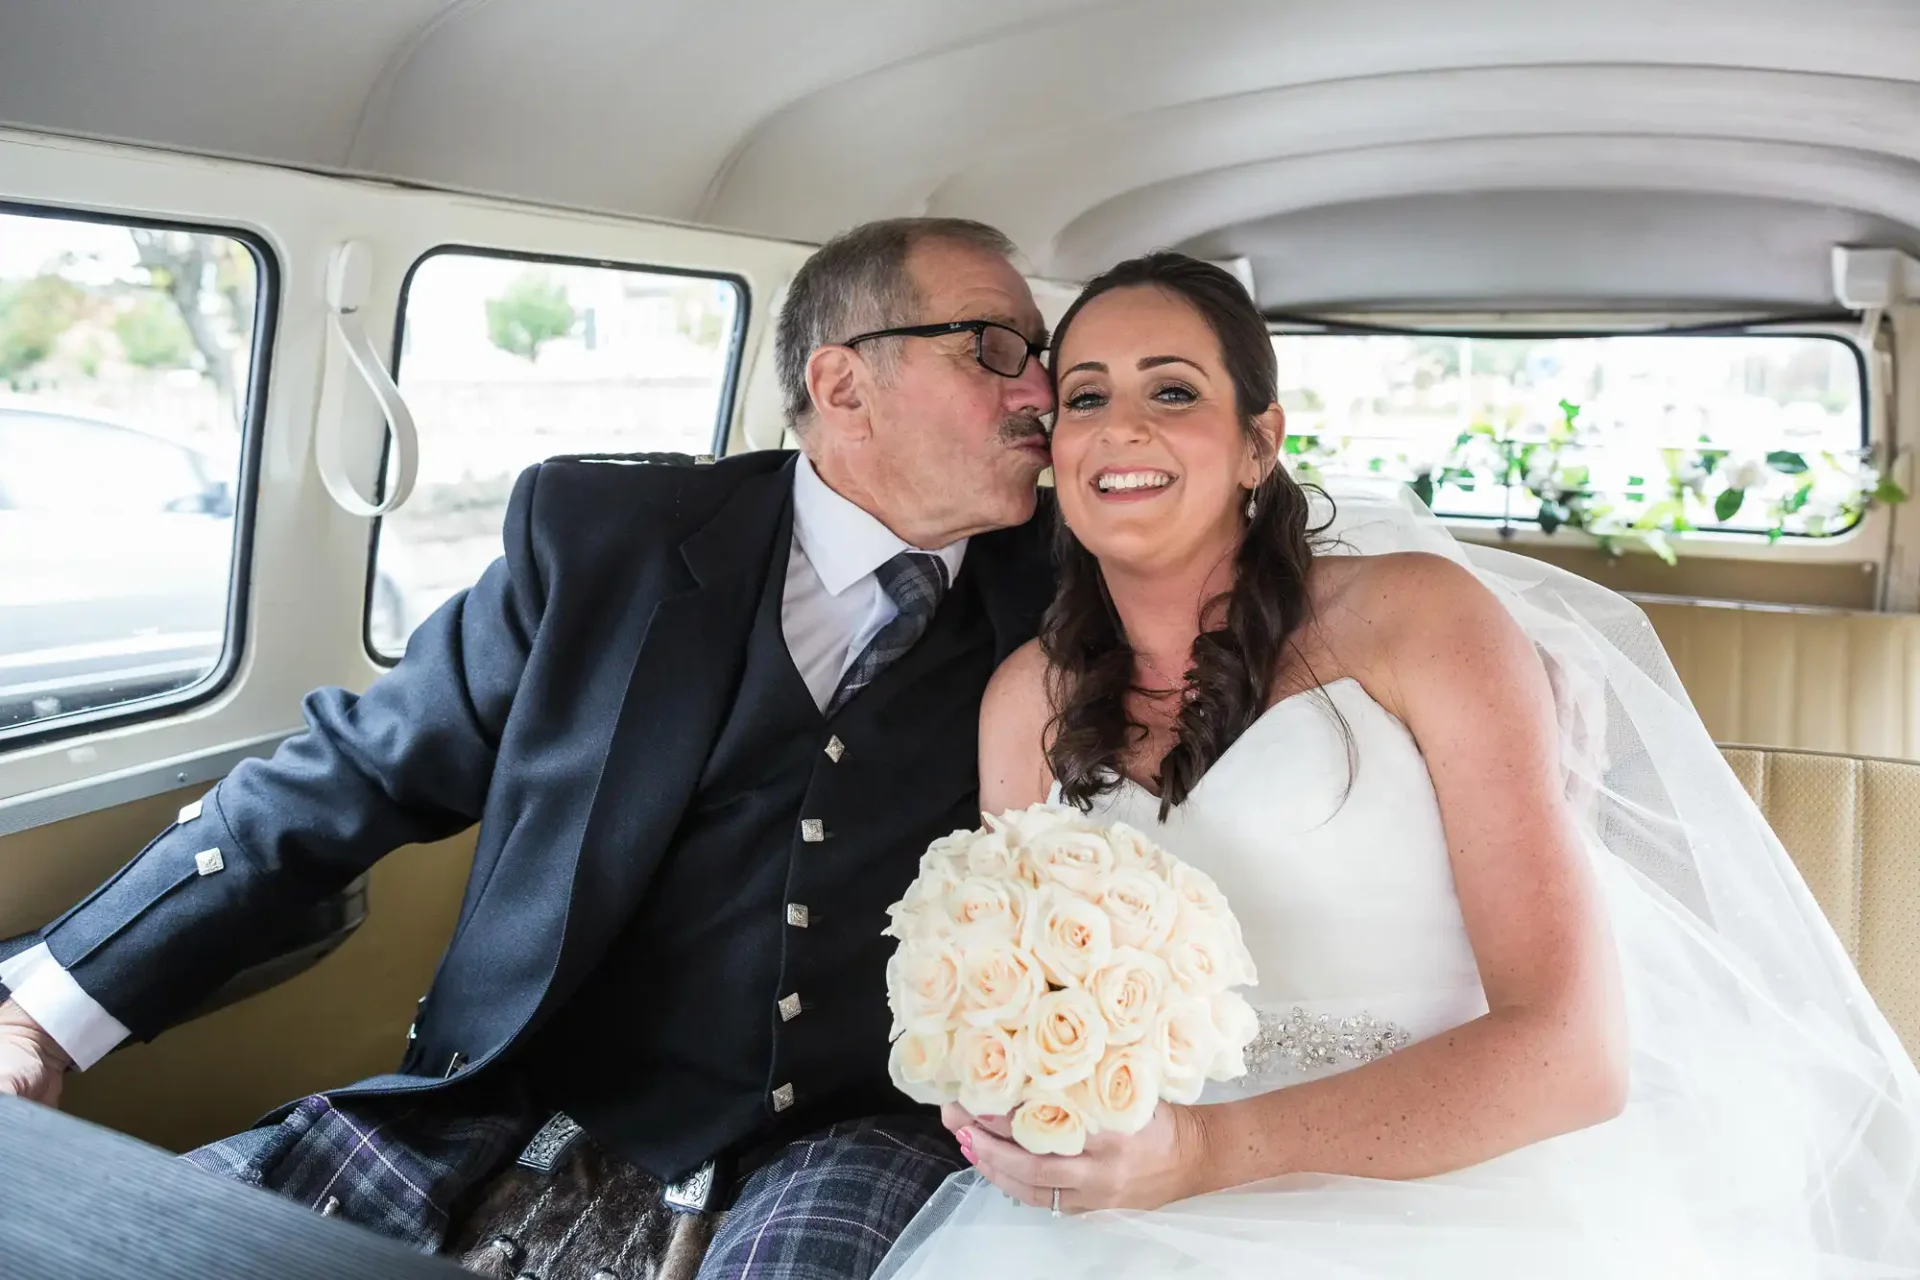 A bride in a white dress holding a bouquet smiles as she receives a kiss on the cheek from an older man in a suit and kilt inside a vintage car.